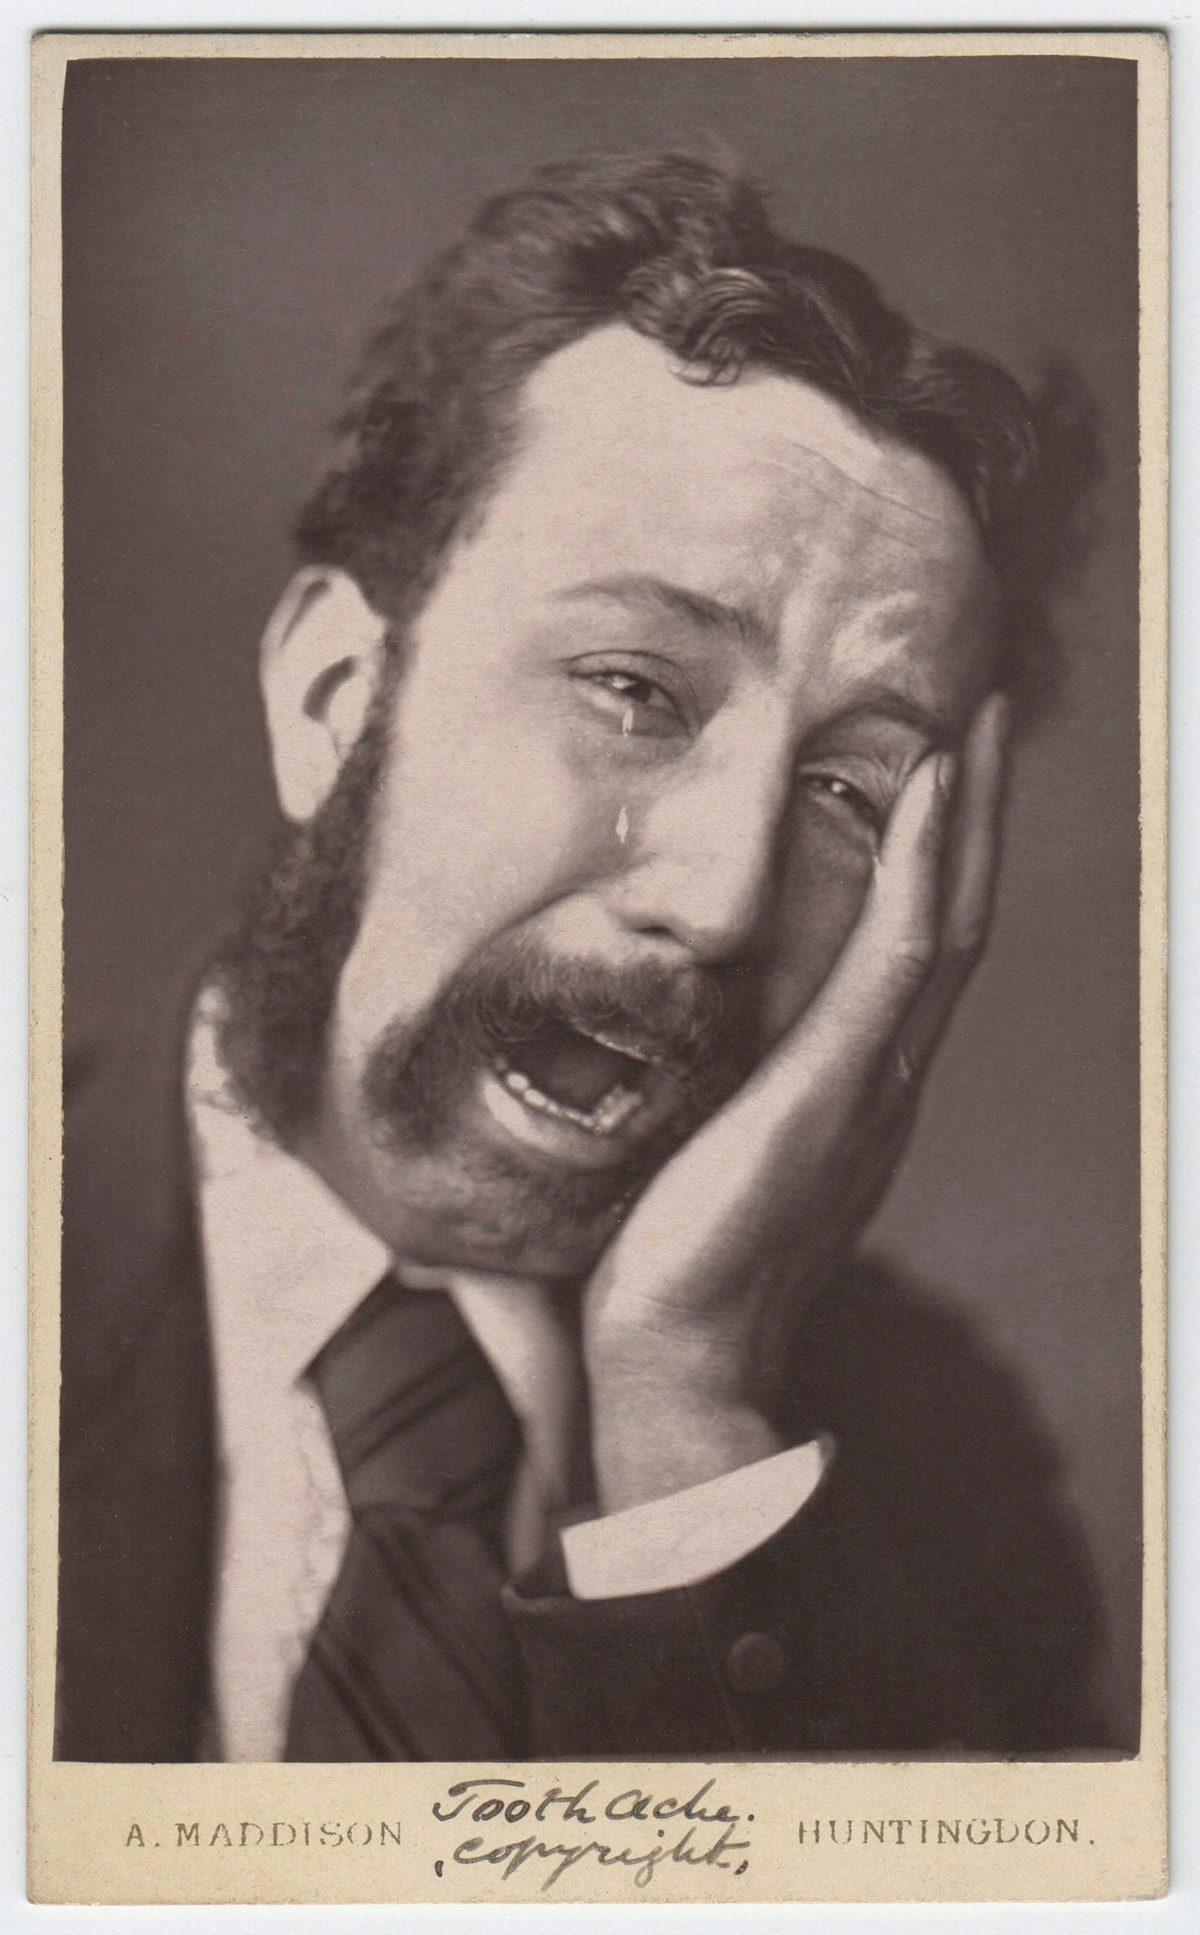 Sepia toned photo of a person with a moustache and wearing a suit and tie, apparently in tears clutching their jaw in pain